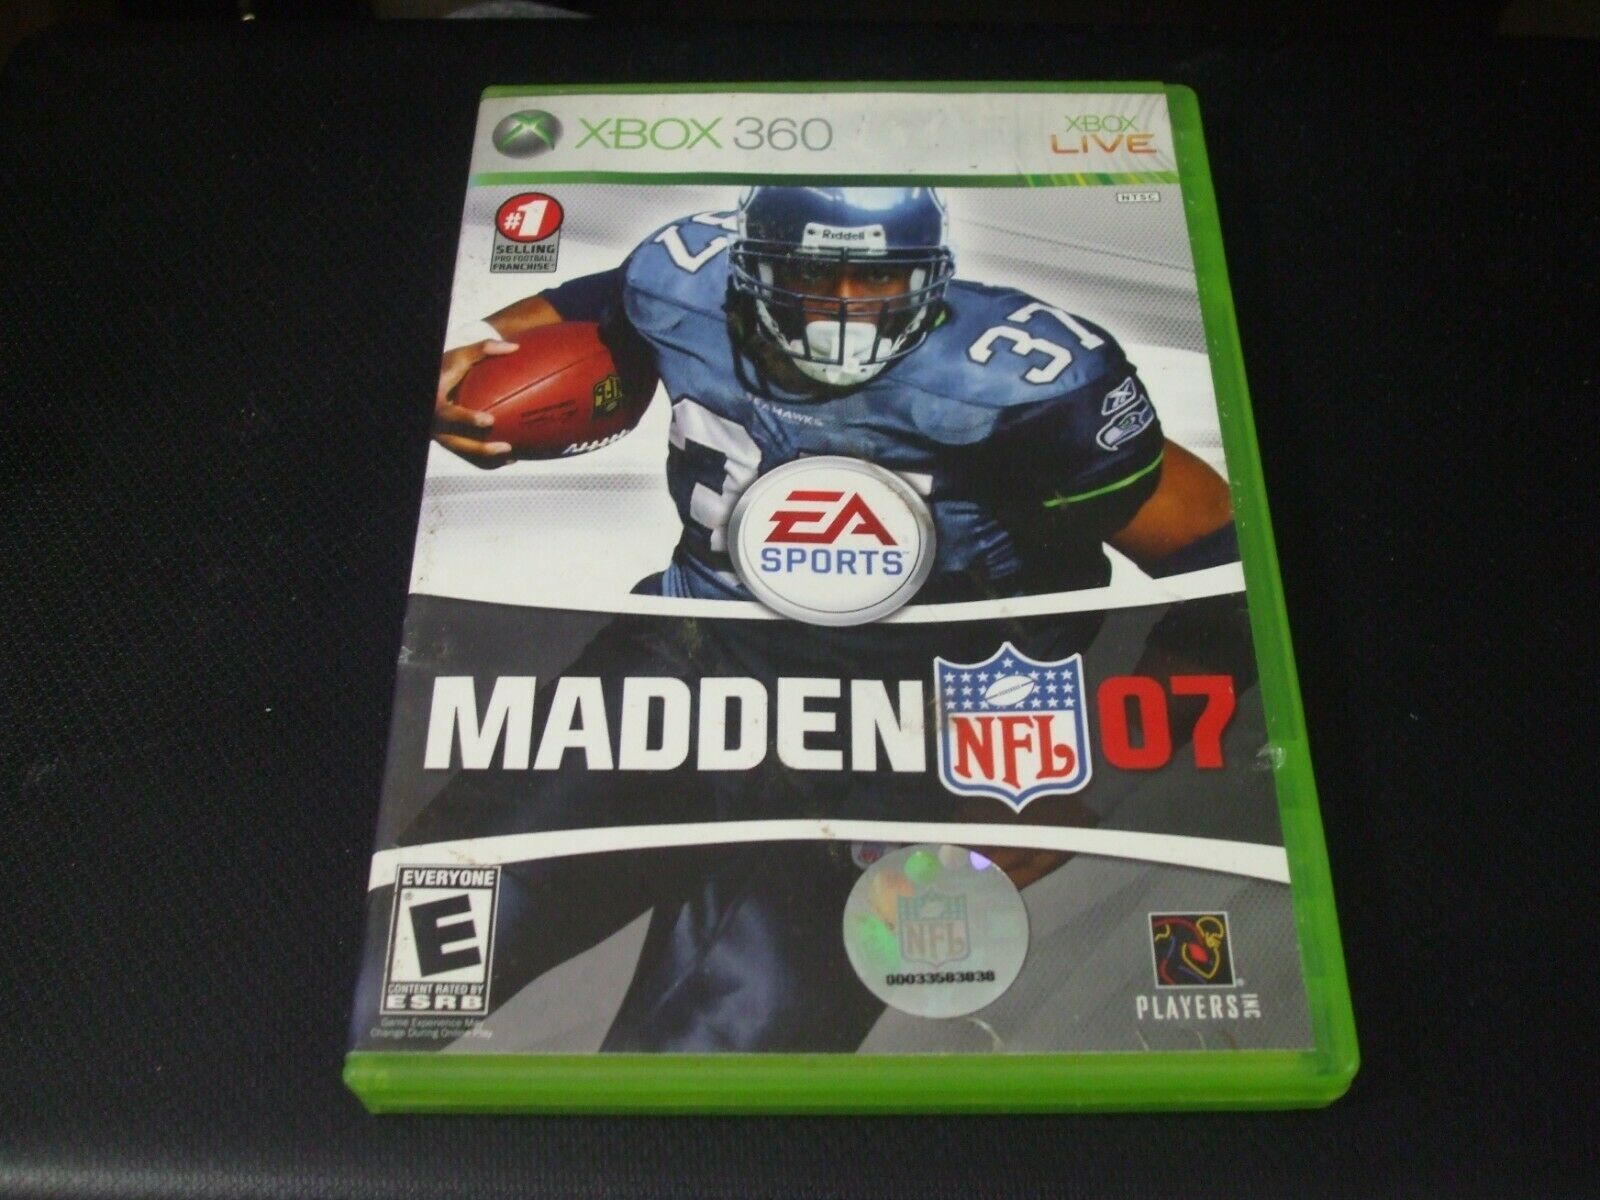 Primary image for Madden NFL 07 (Microsoft Xbox 360, 2006)